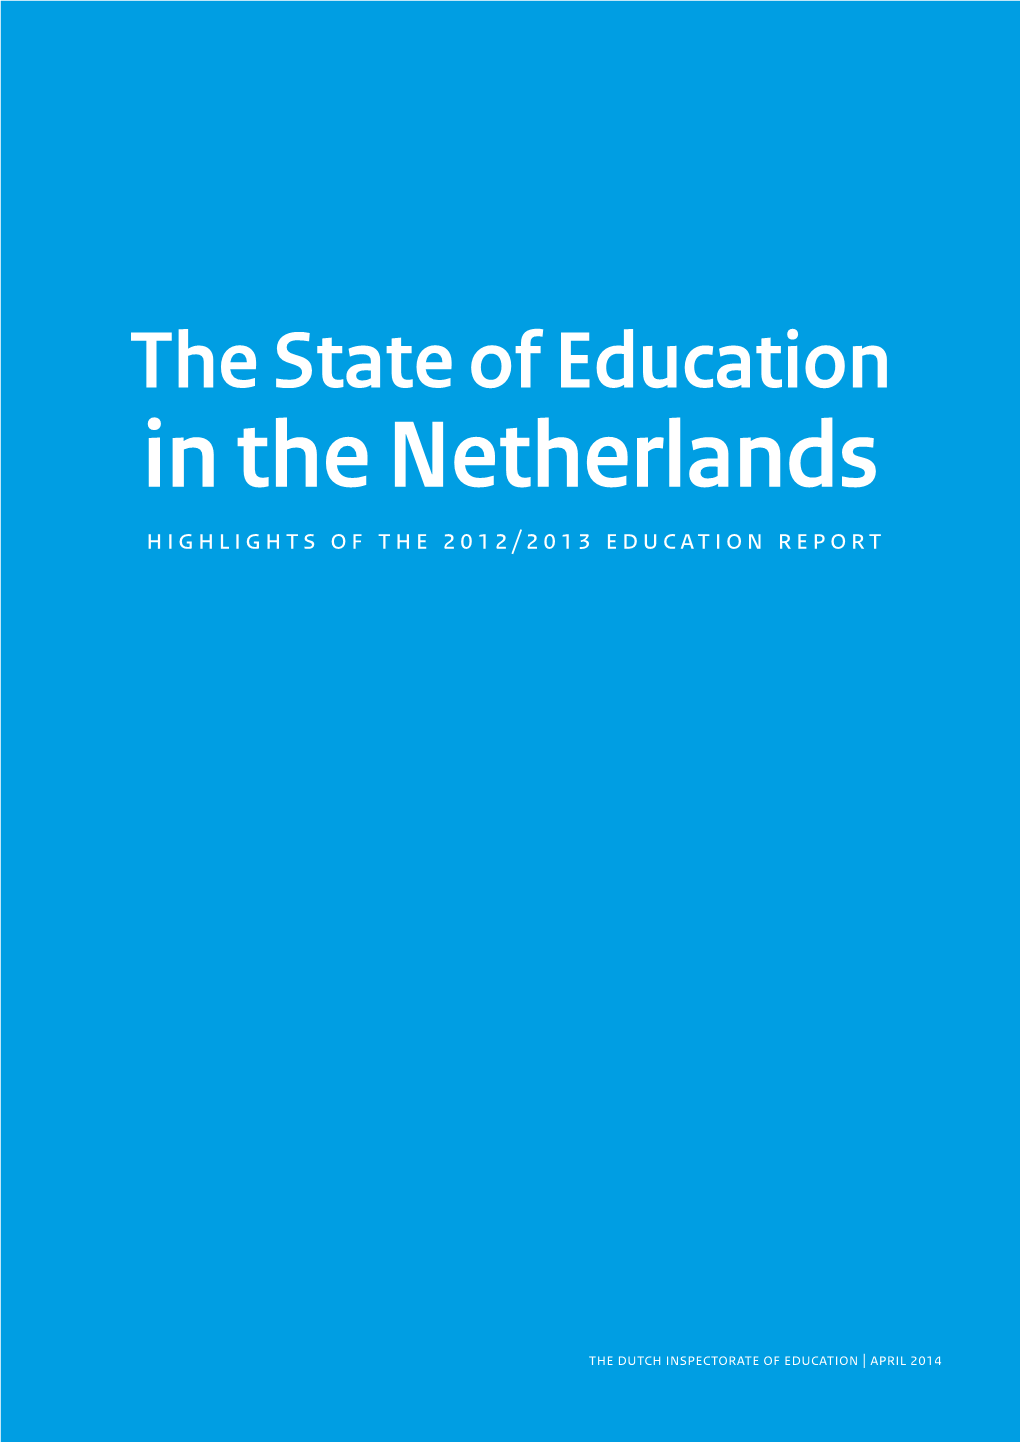 The State of Education in the Netherlands 2012/2013